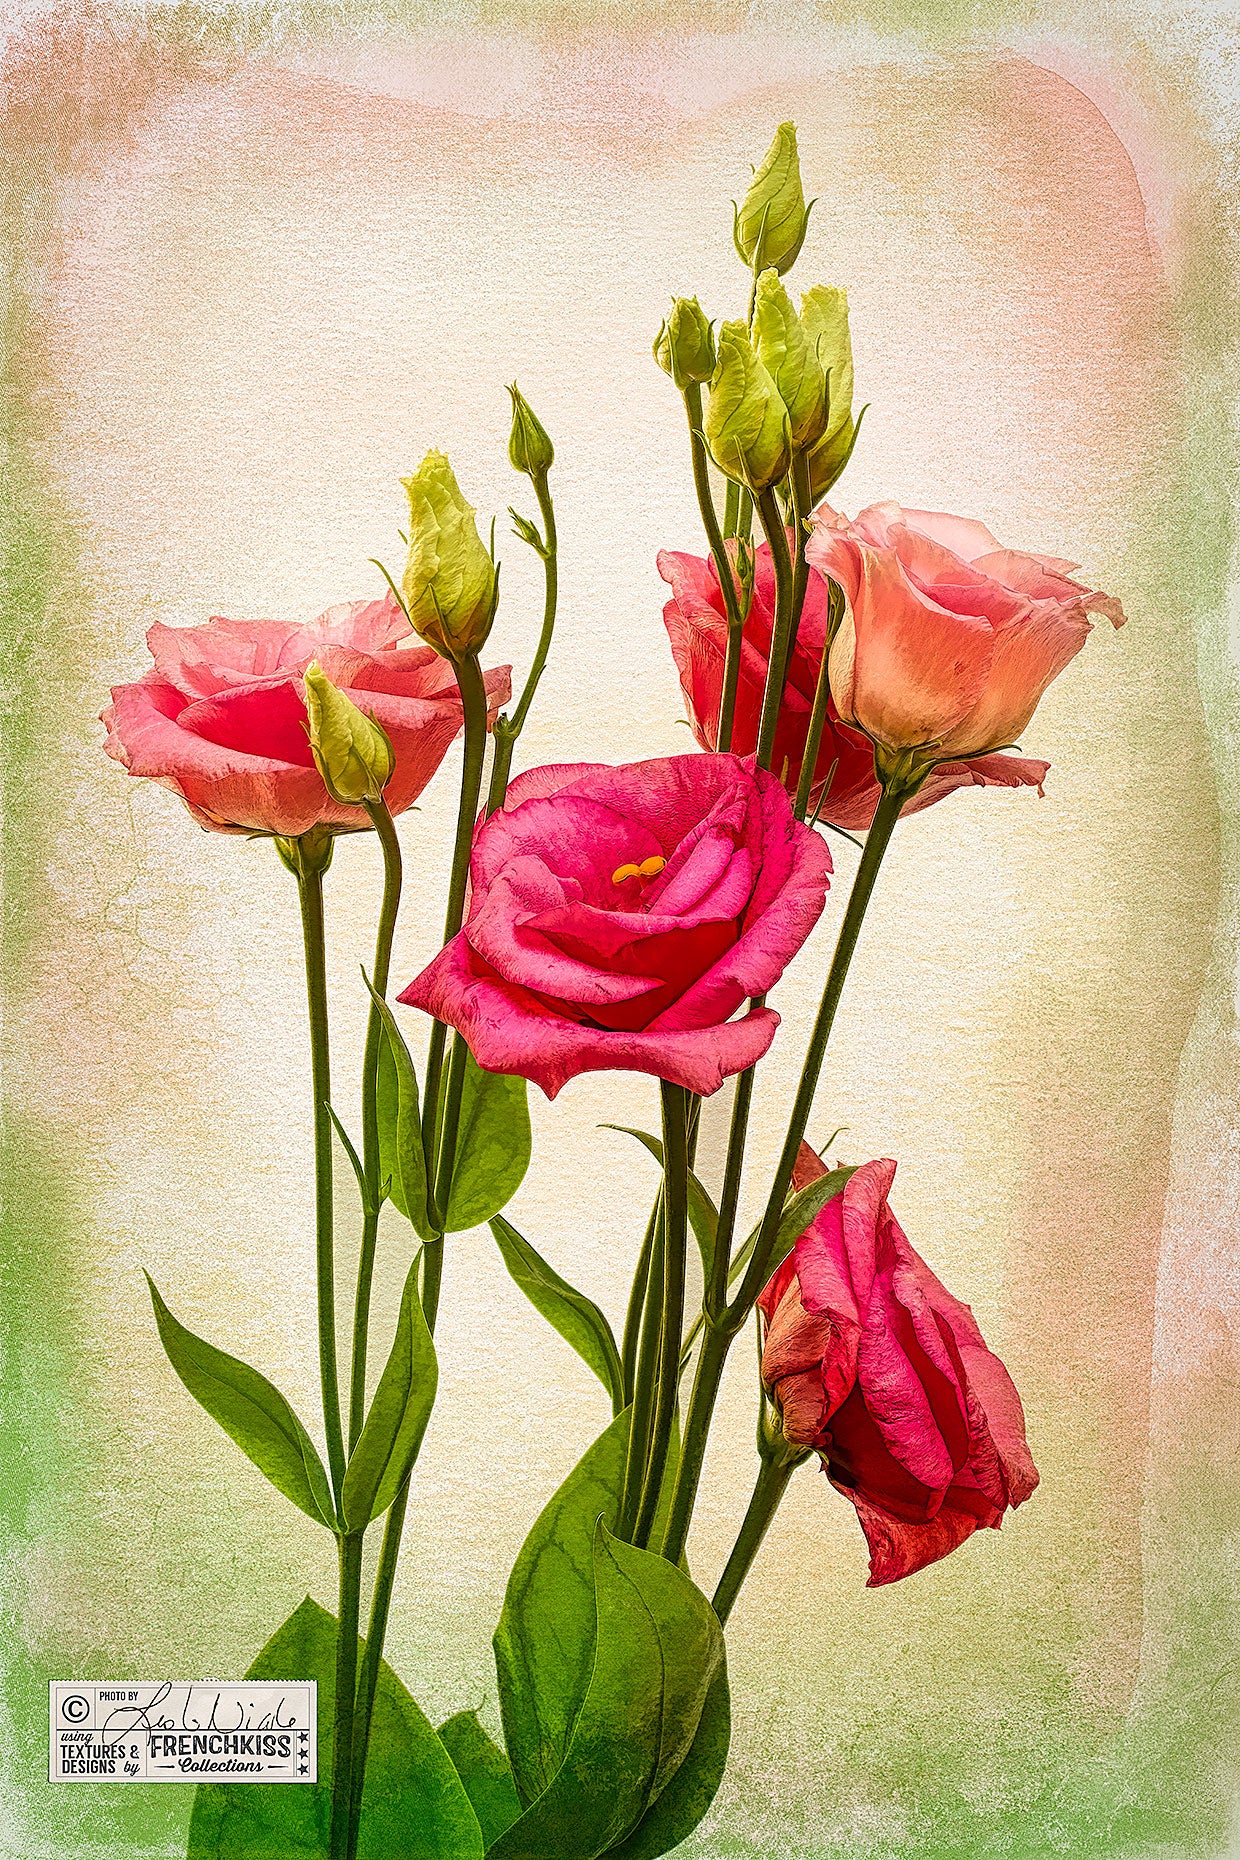 Lisianthus flowers photograph with textures and Topaz Labs filters for an artistic look.